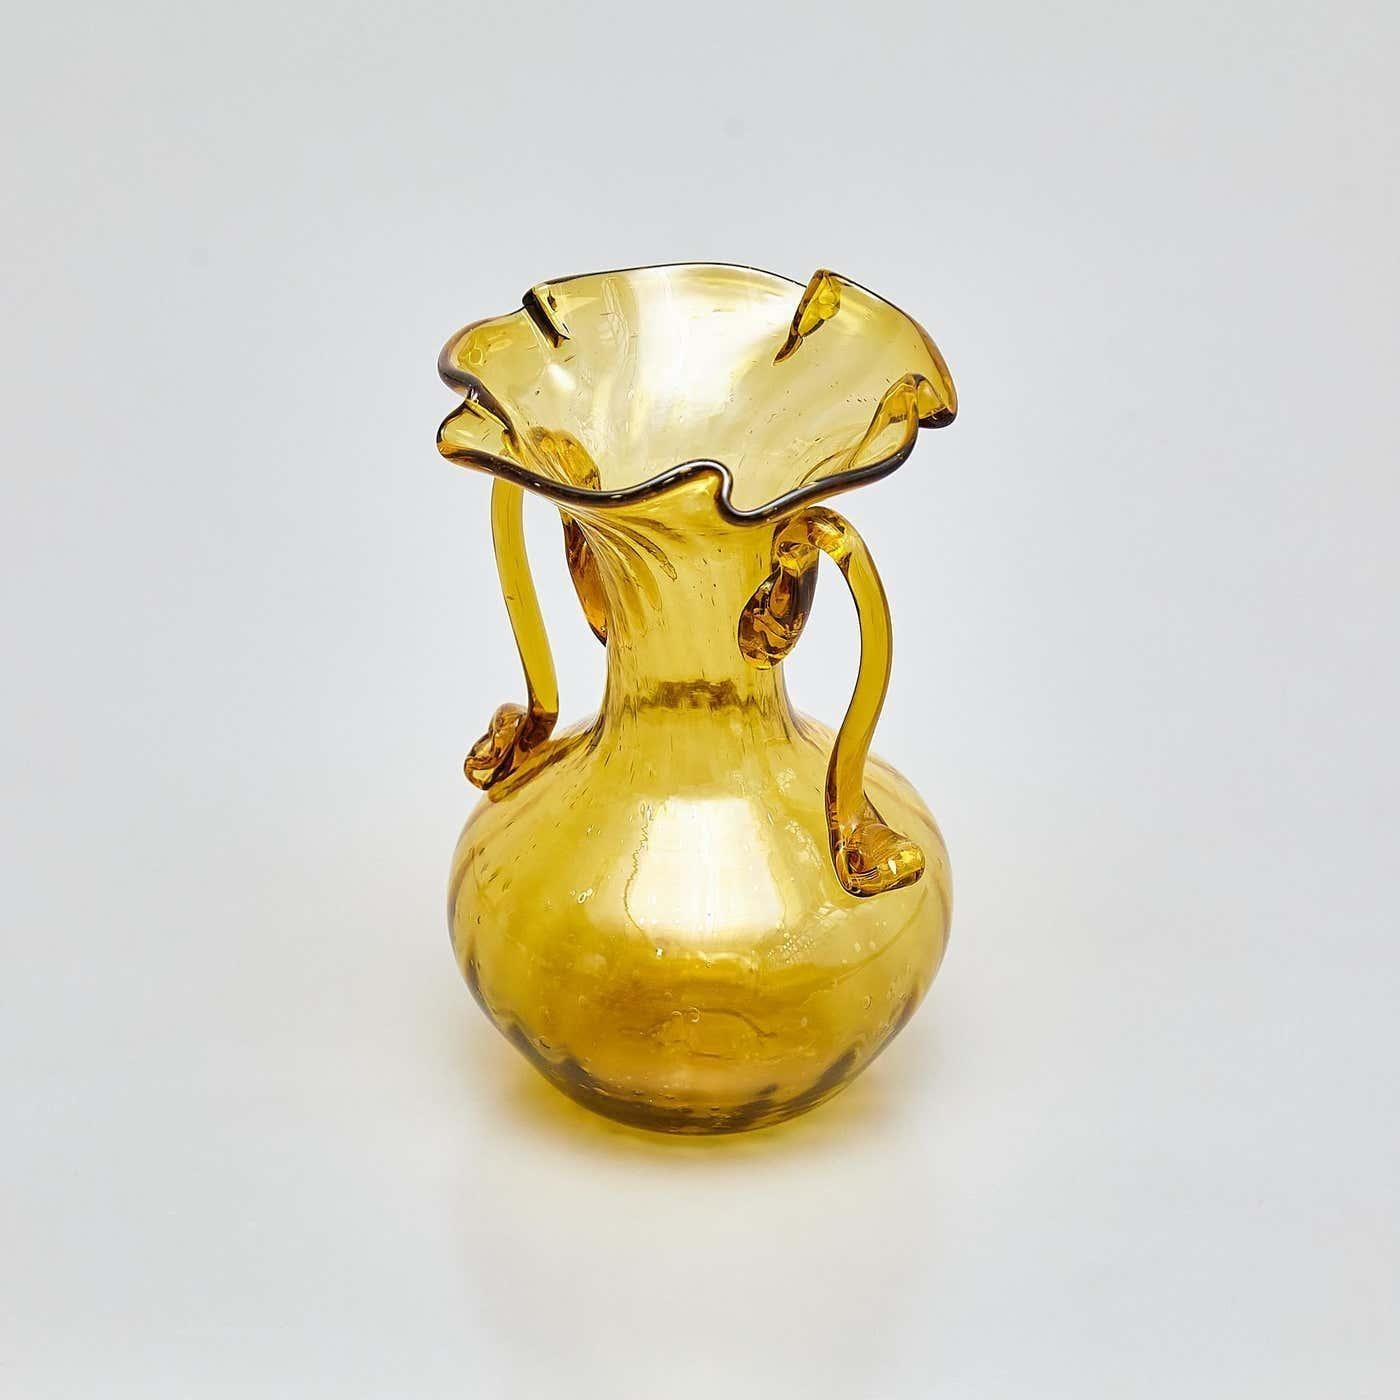 Spanish Extraordinary Yellow Blown Glass Vase - Early 20th Century For Sale